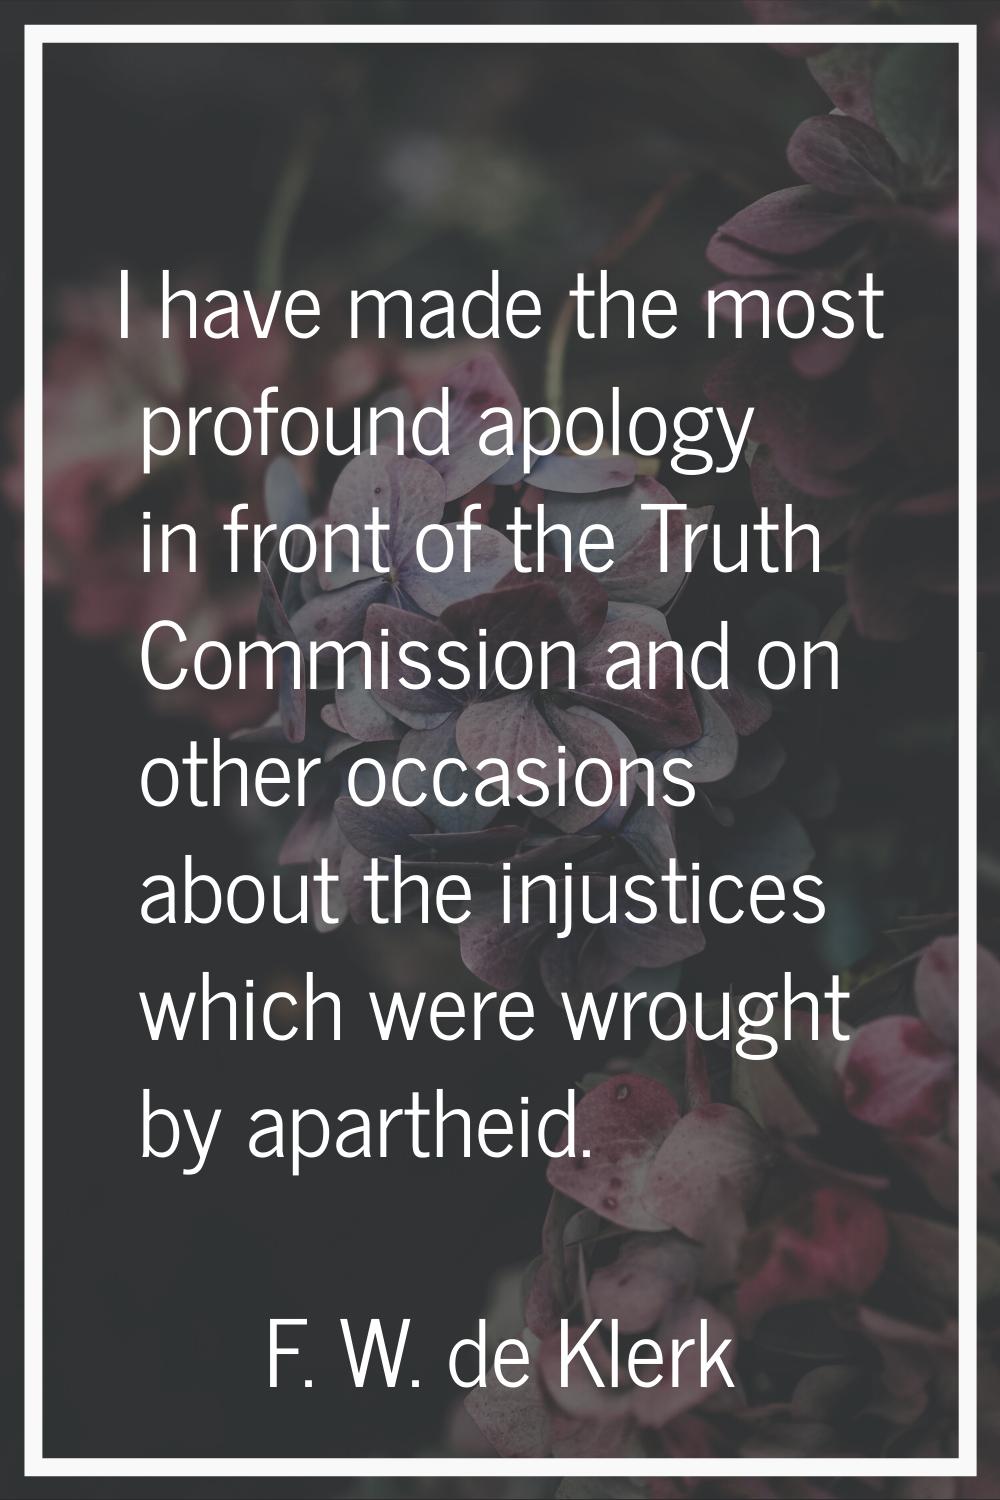 I have made the most profound apology in front of the Truth Commission and on other occasions about